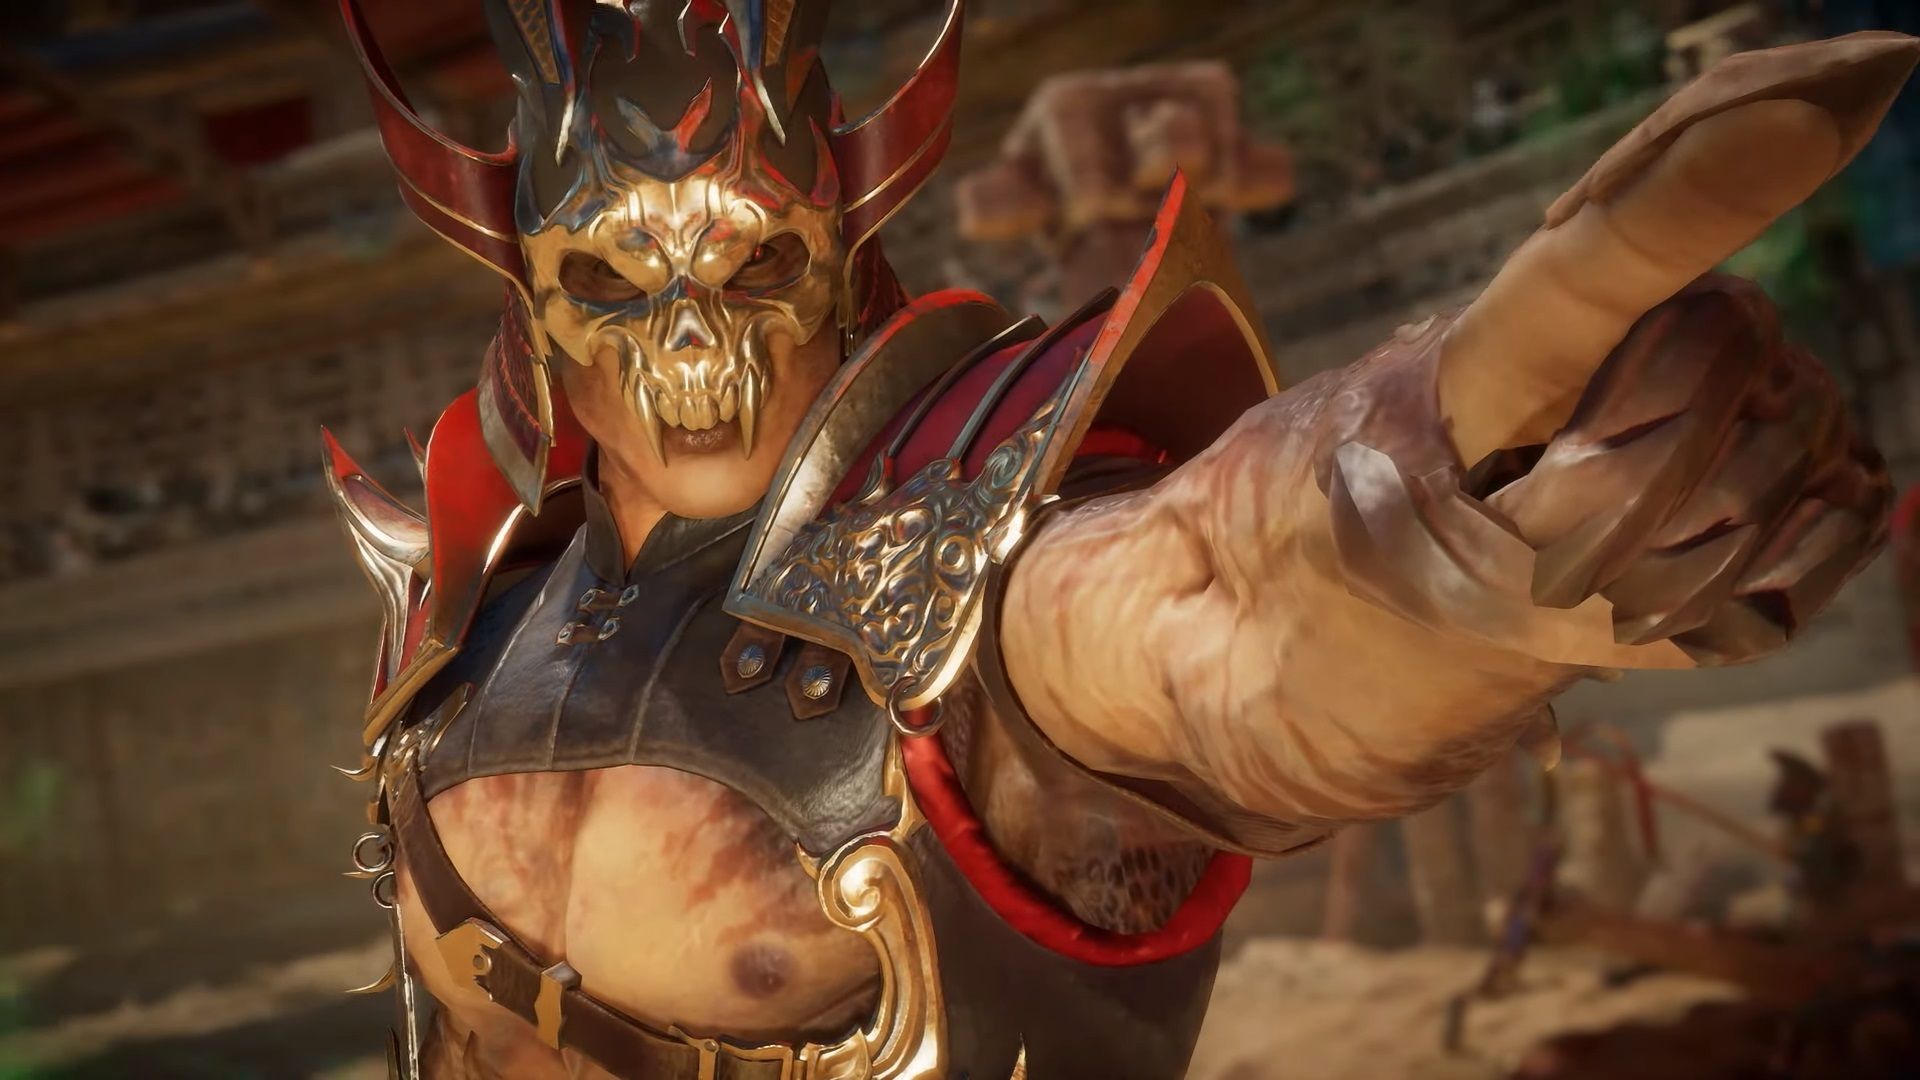 Tips for Playing Mortal Kombat 11: 12 Things the Game Doesn't Tell You